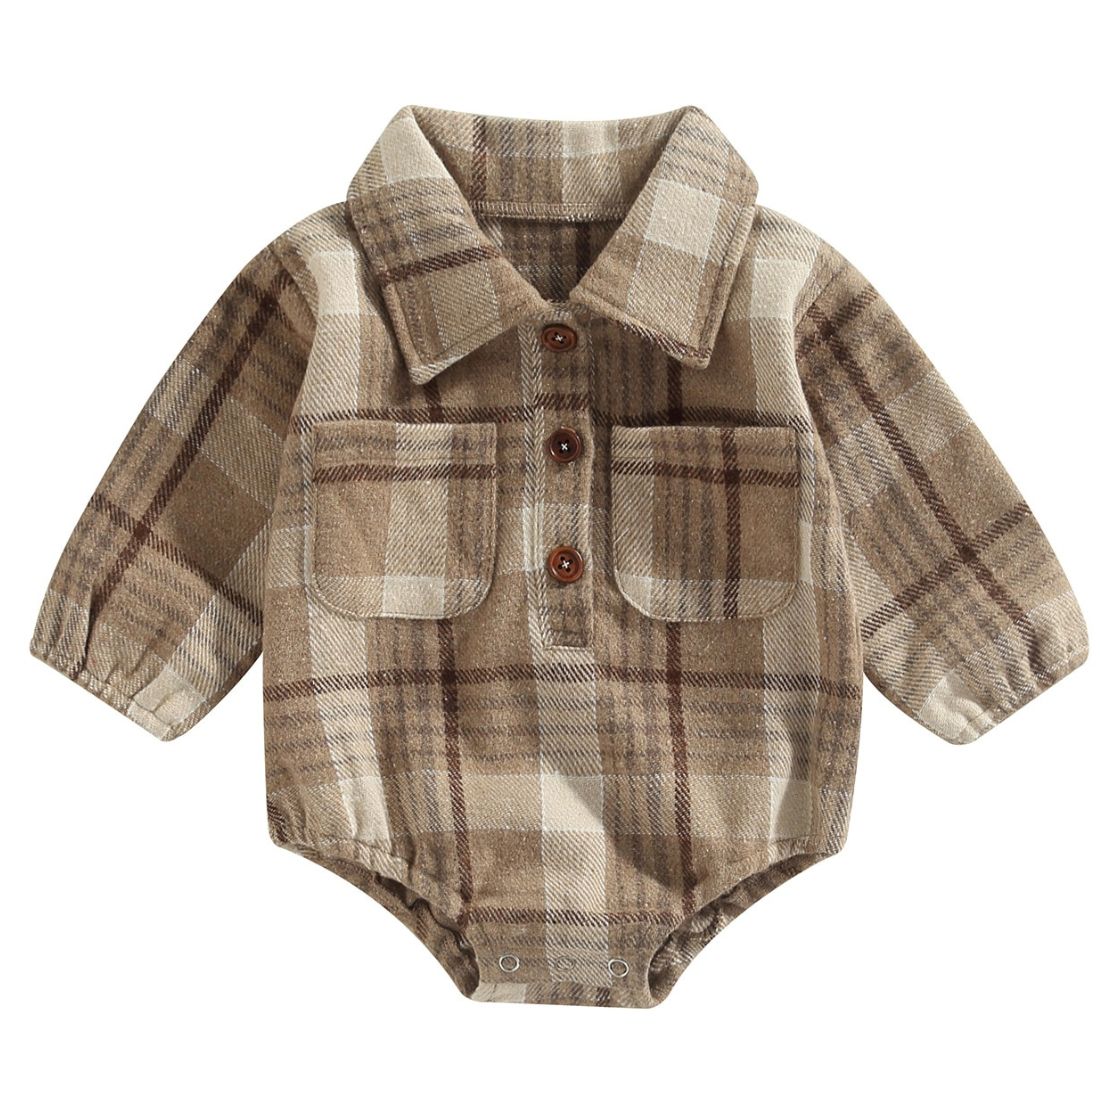 A baby boy earthy khaki plaid bodysuit with two front pockets and easy snap clips